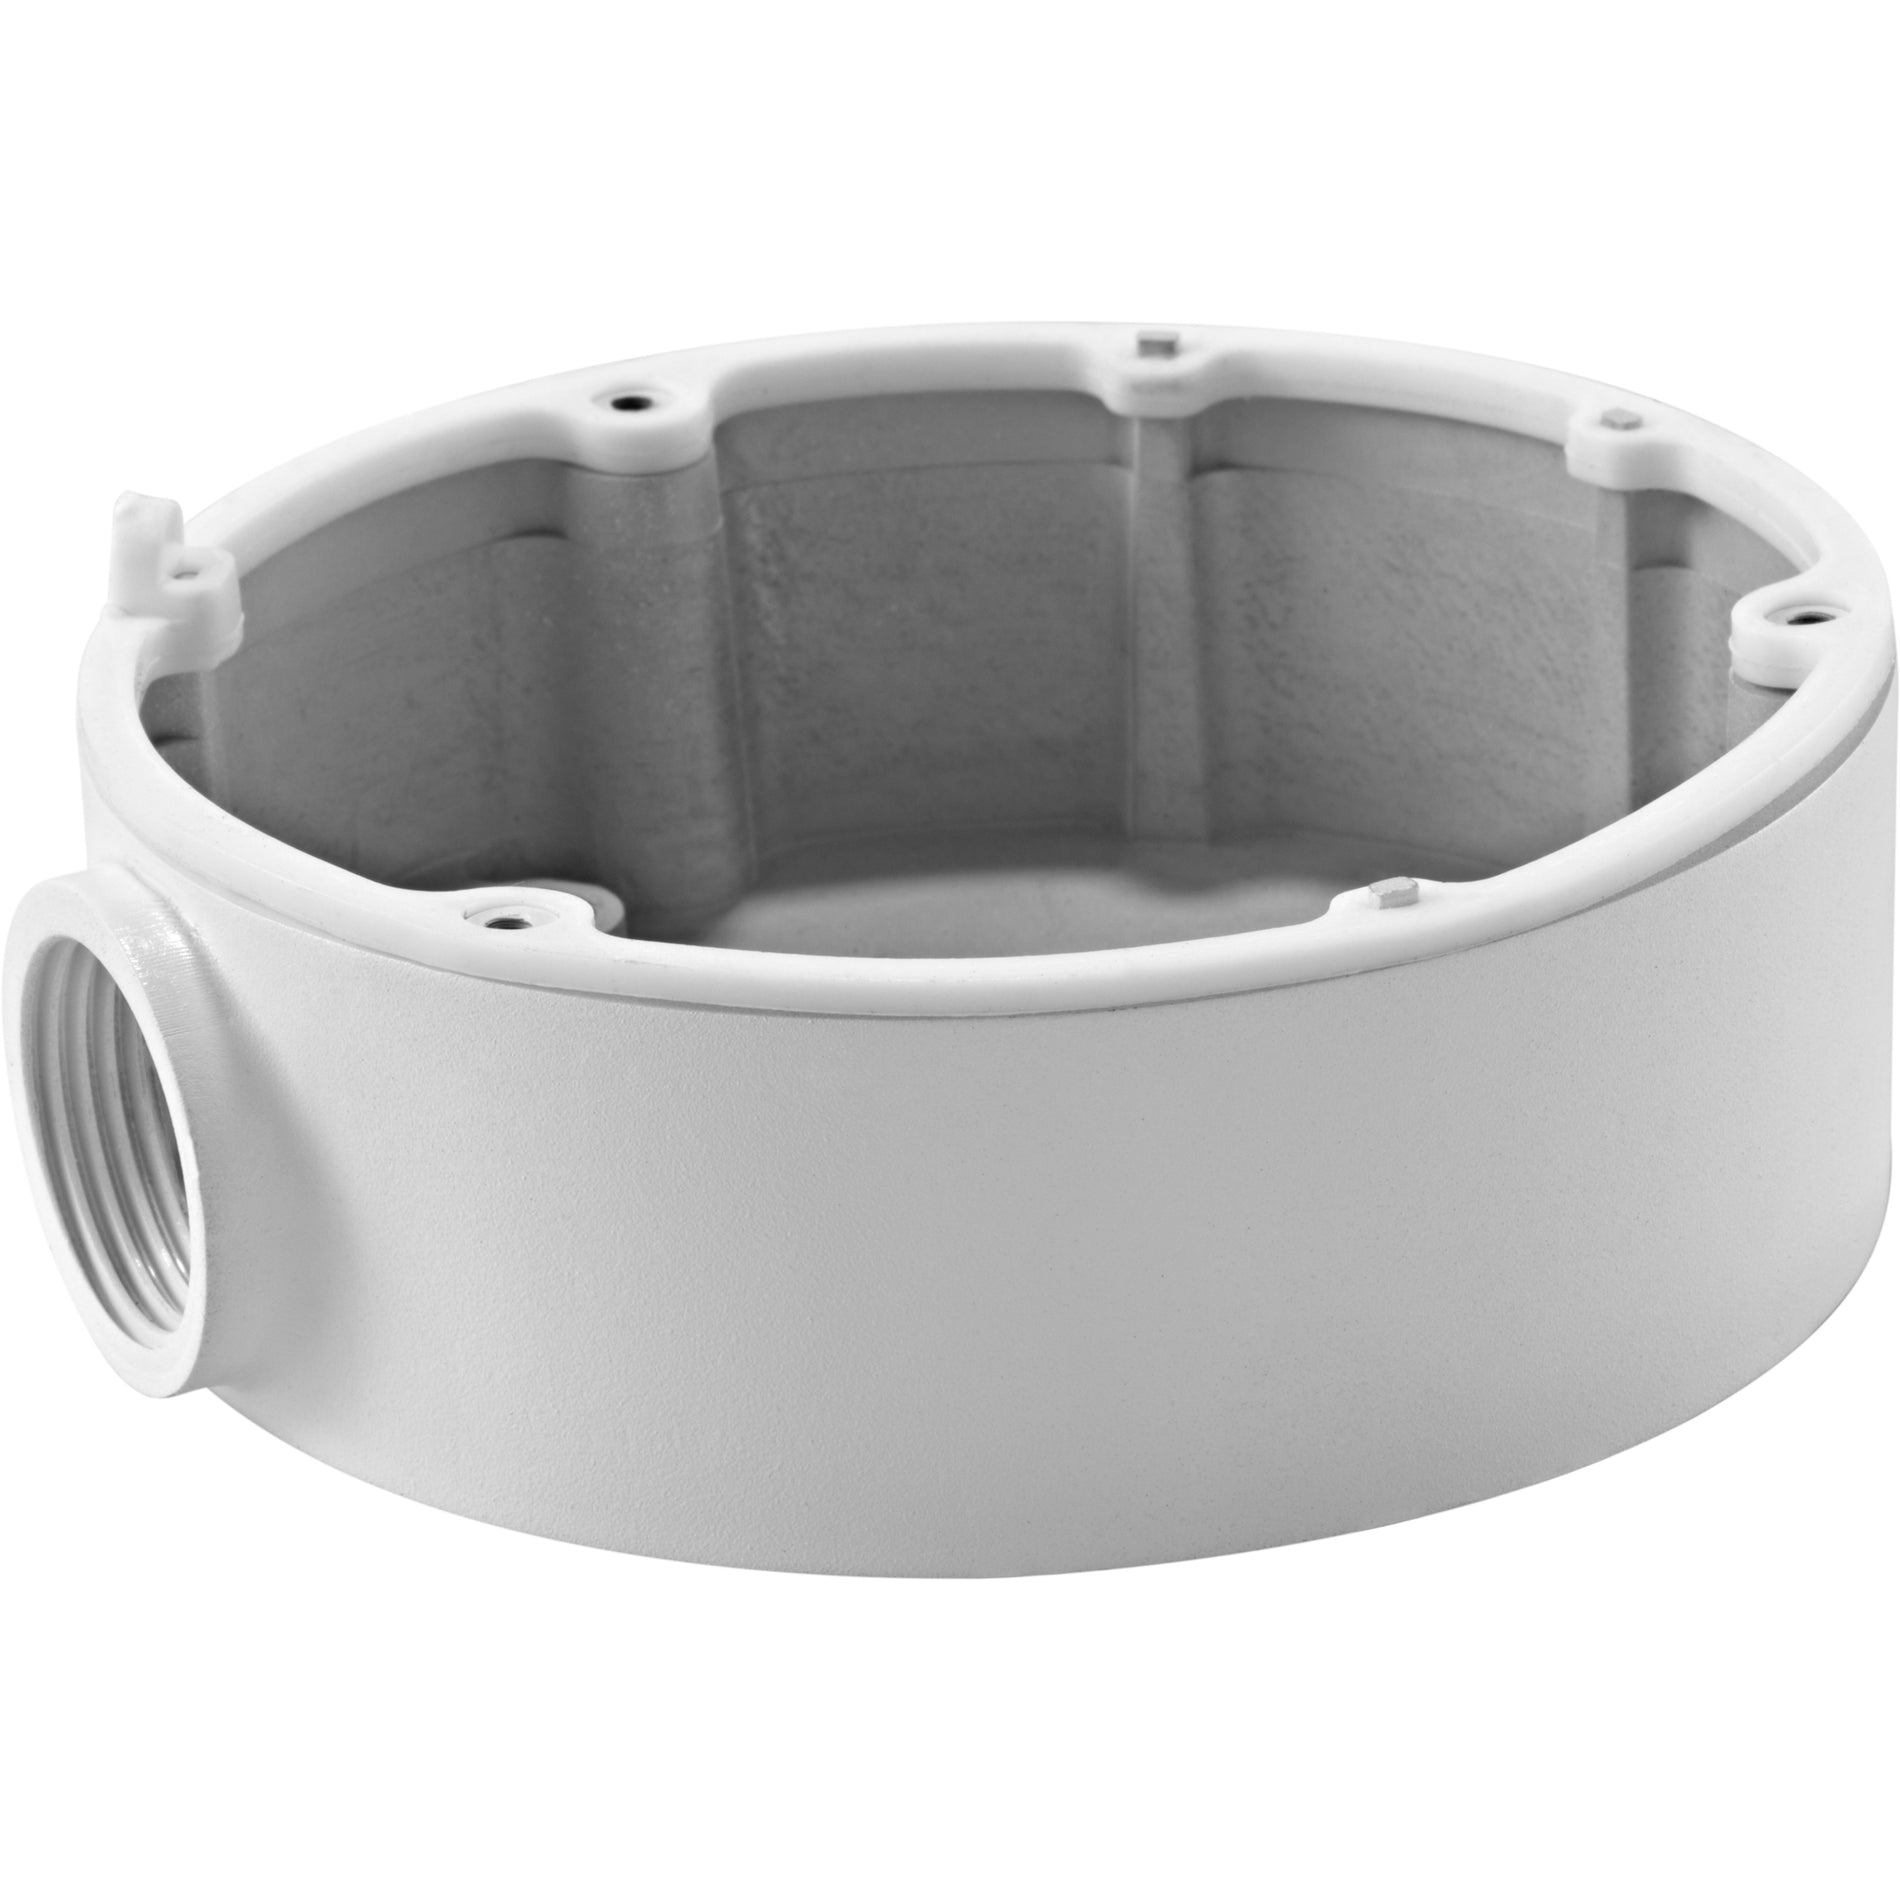 Hikvision CB110 Mounting Box for Network Camera - White, Water Proof